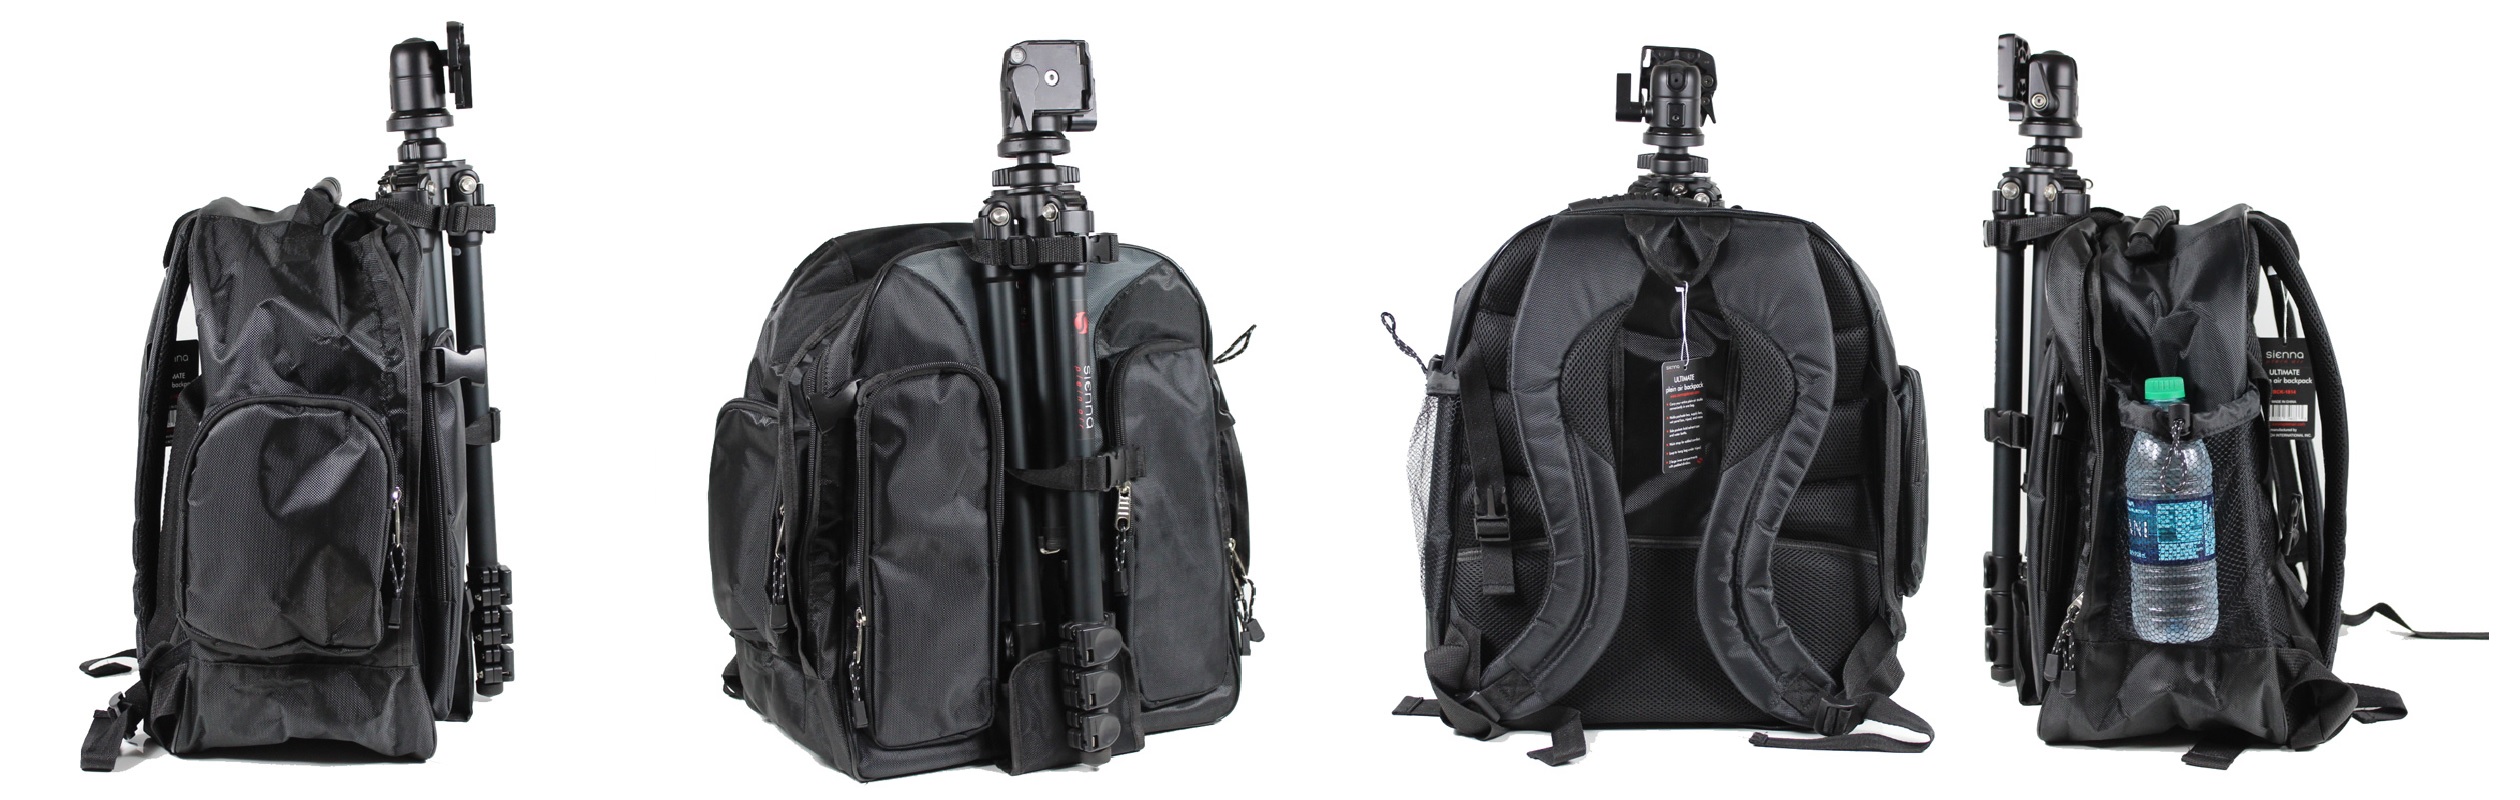 sienna backpack with tripod